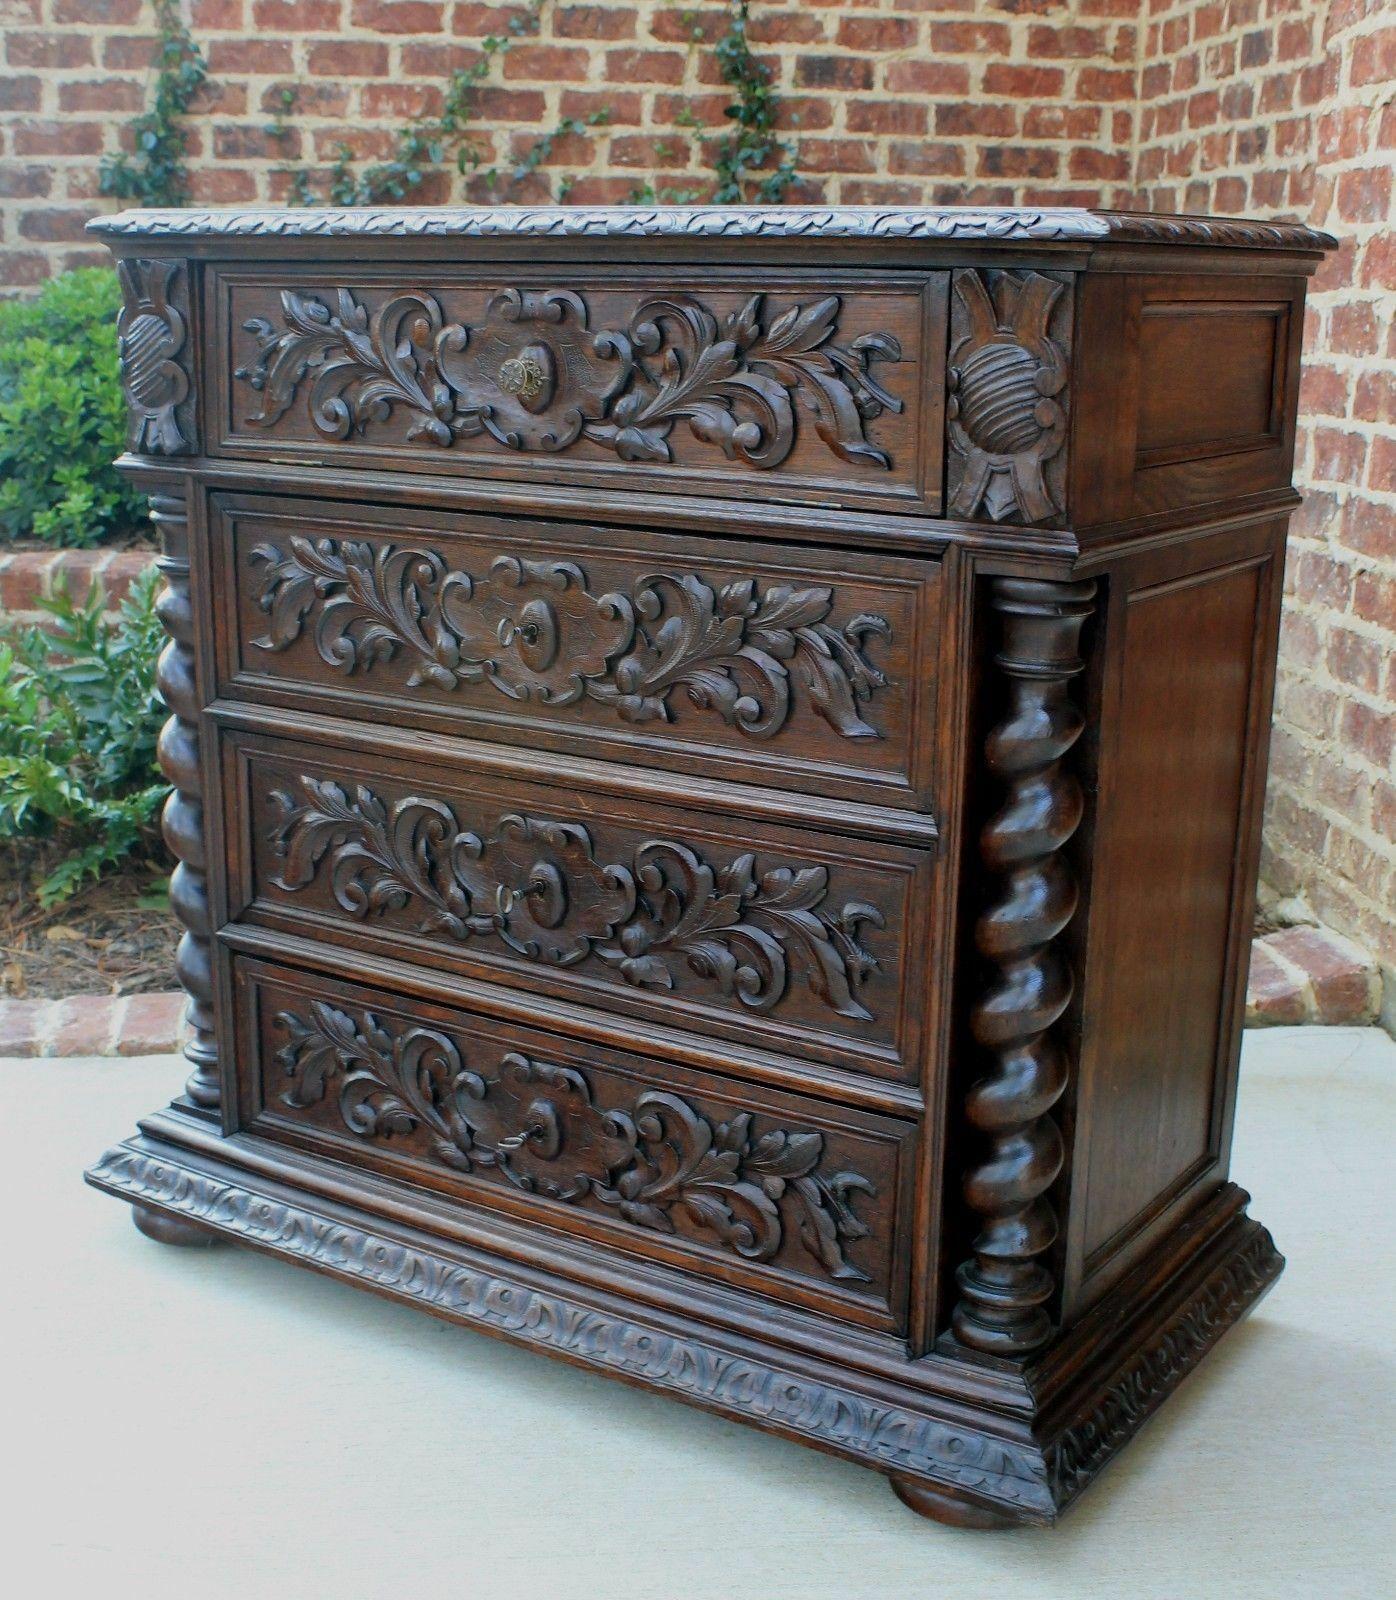 Exquisite antique French oak 19th century renaissance revival barley twist chest of drawers~~c. 1860s
 
This is only one of multiple exquisite pieces recently purchased from a French castle estate. Wonderful hand-carved oak pieces in the highly